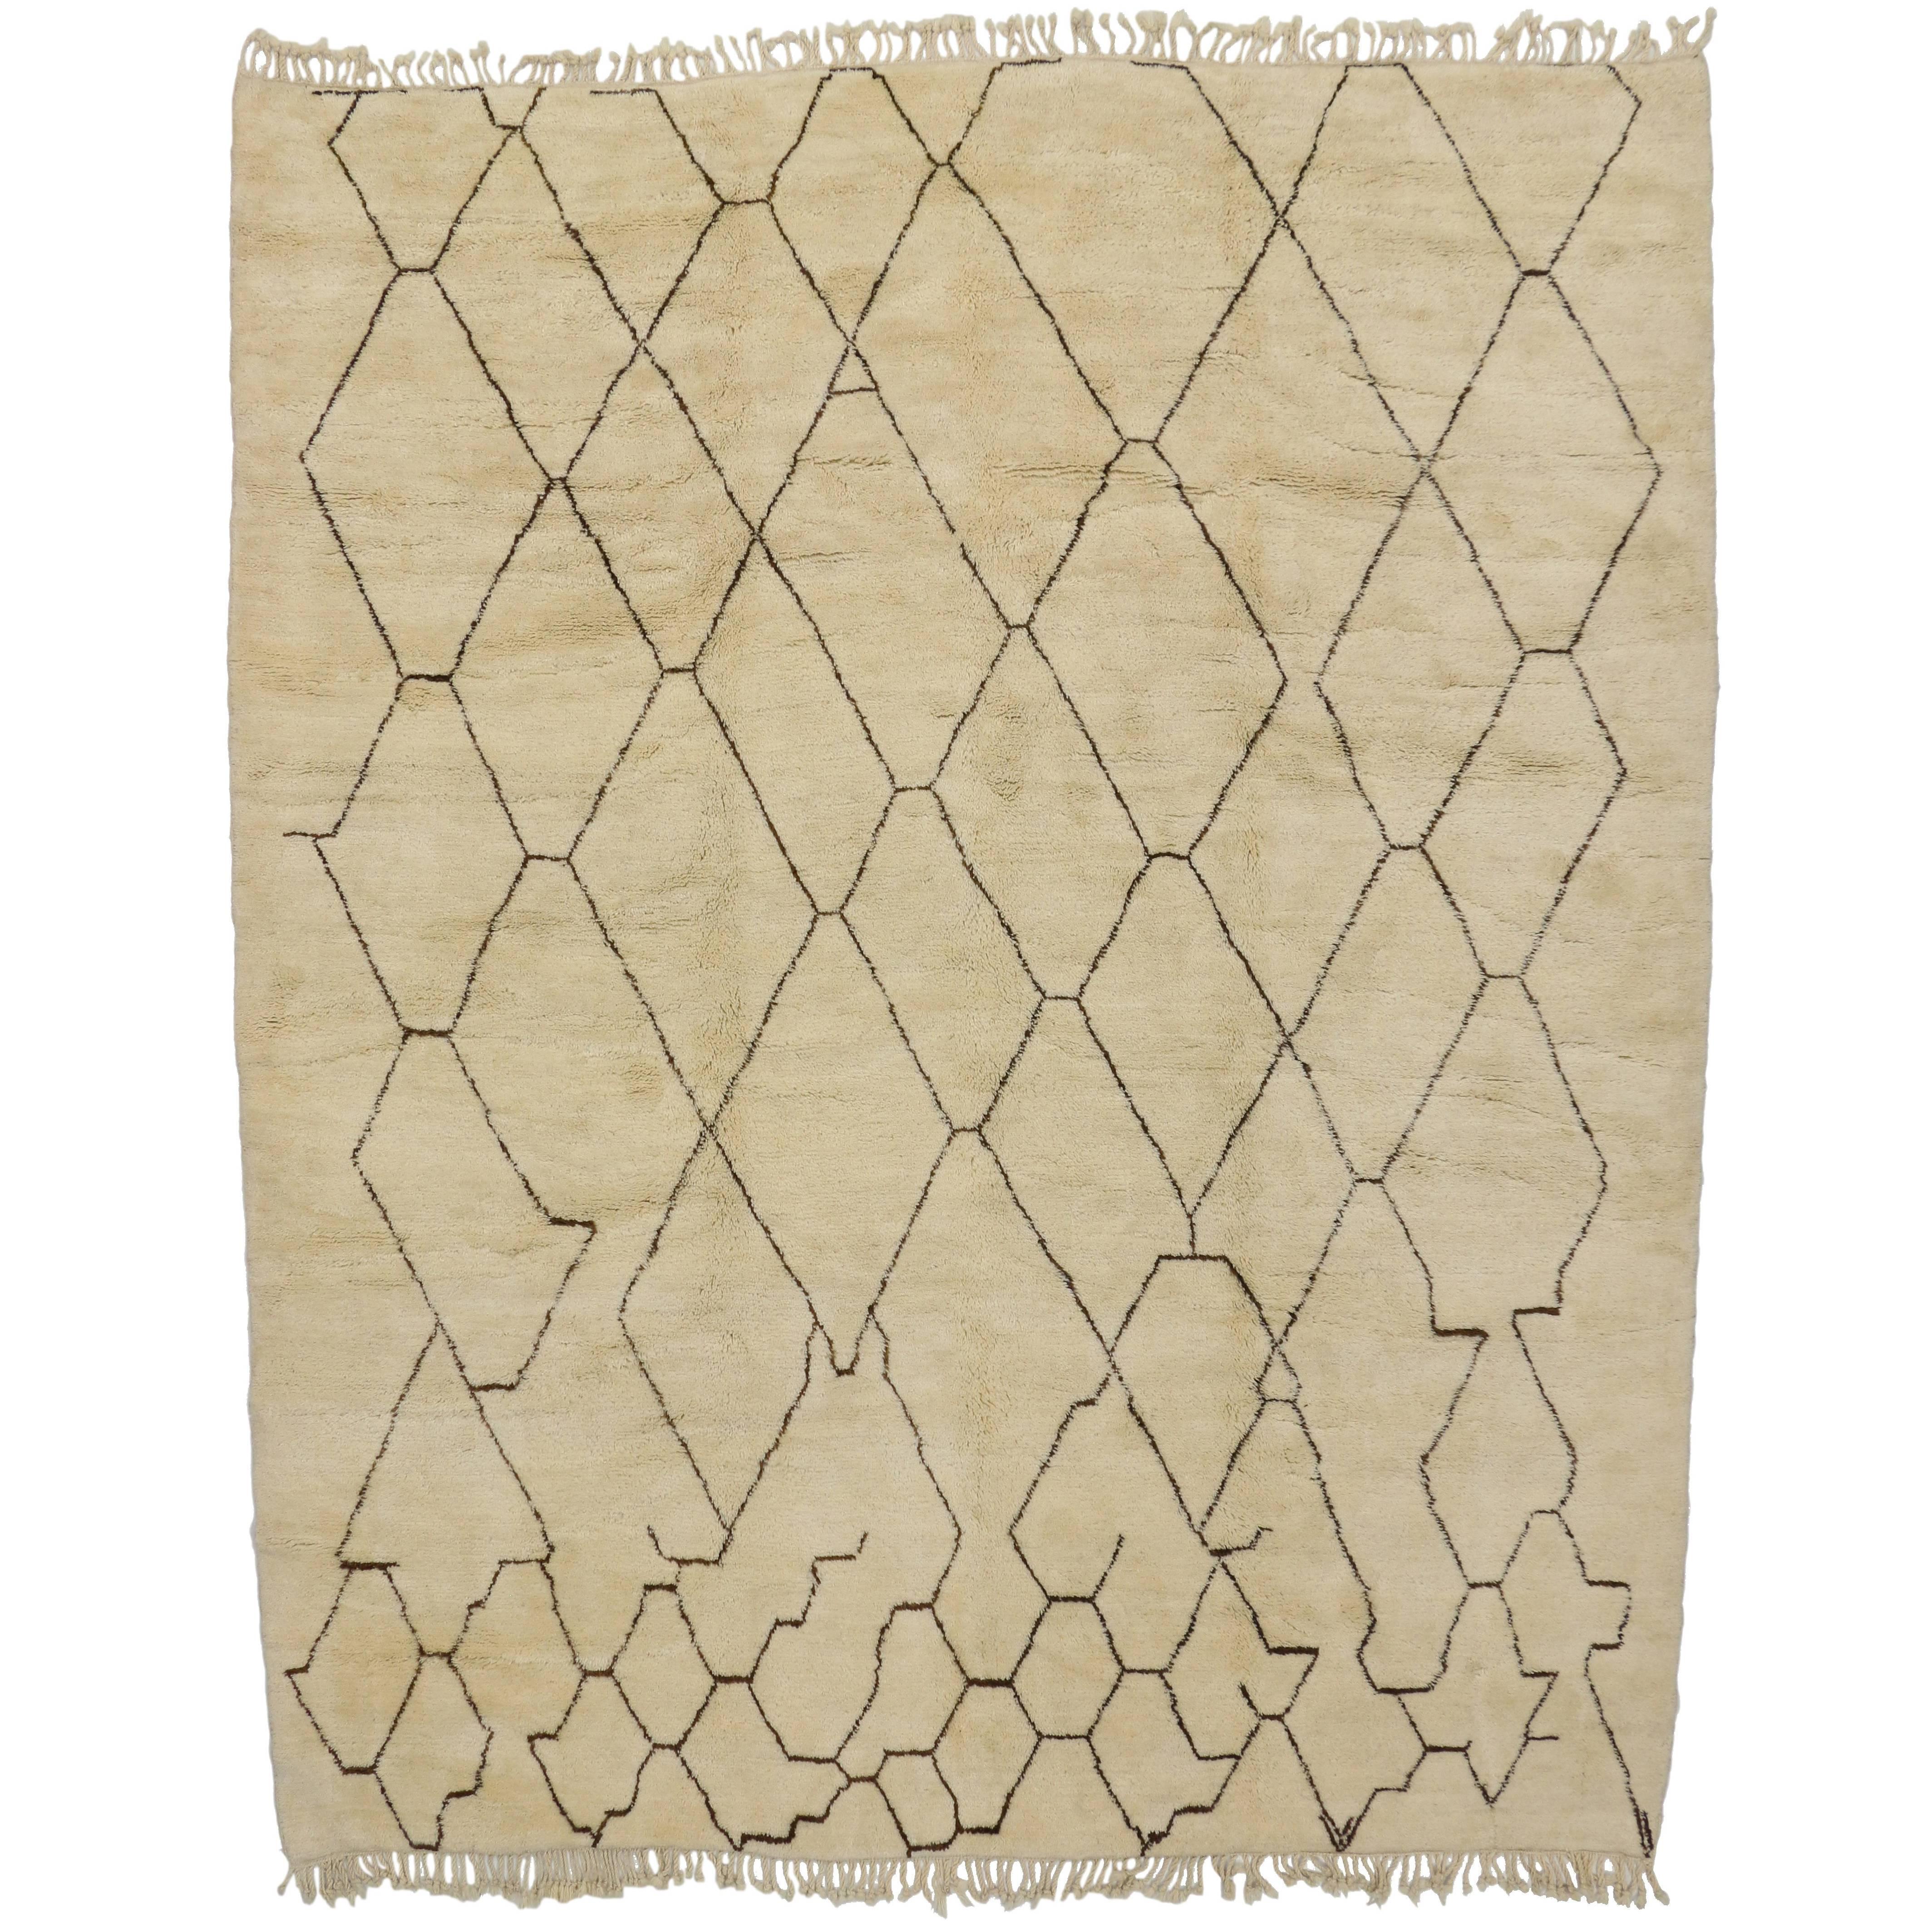 New Contemporary Moroccan Rug with Nomadic Style and Hygge Vibes